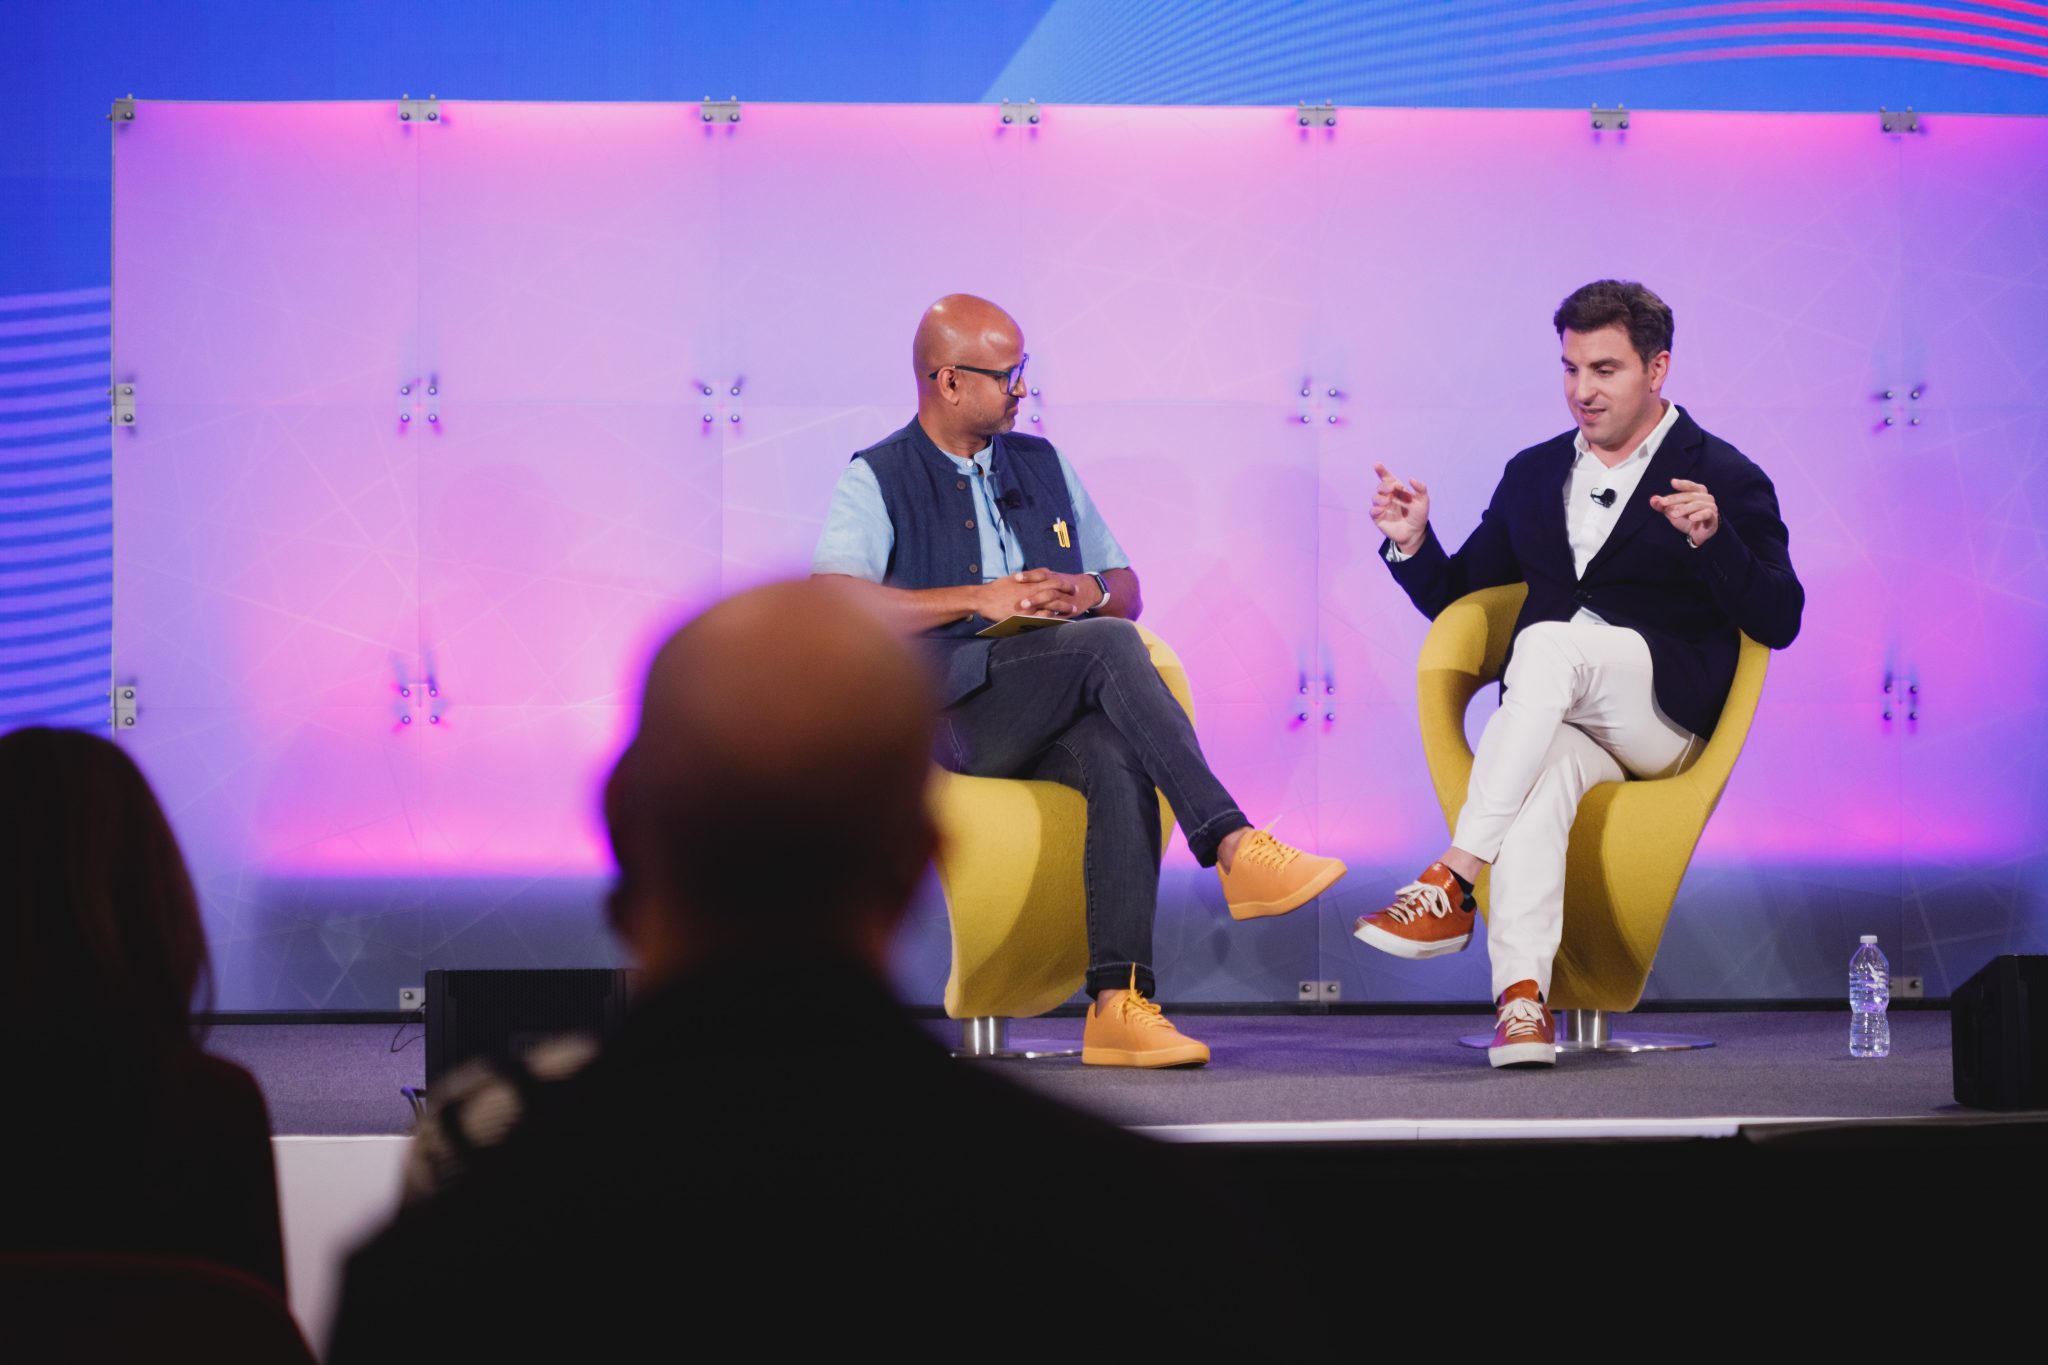 Airbnb CEO Brian Chesky speaking with Skift Founder Rafat Ali